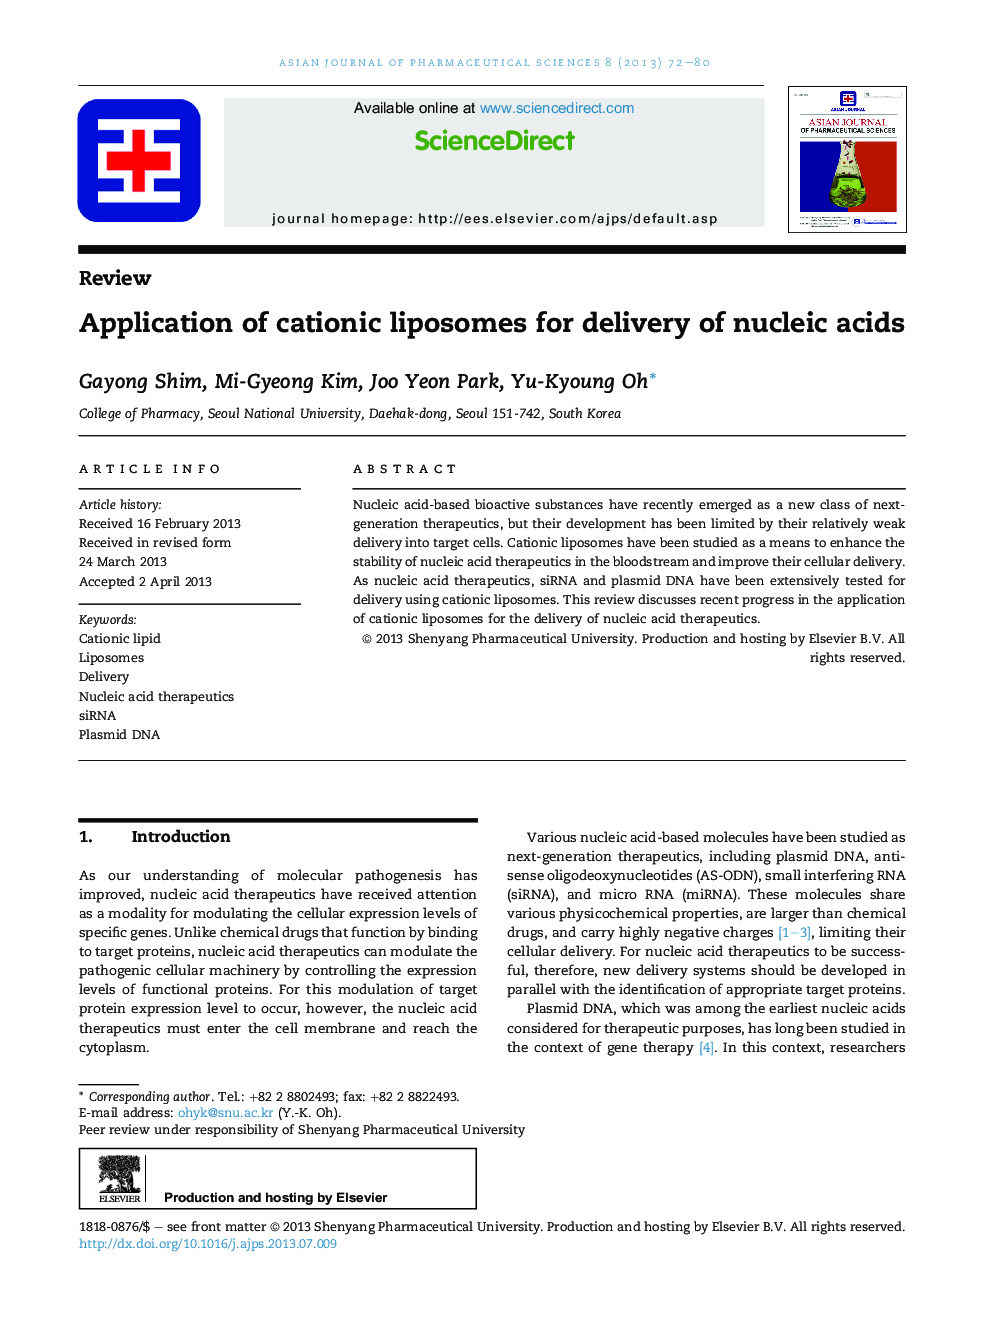 Application of cationic liposomes for delivery of nucleic acids 